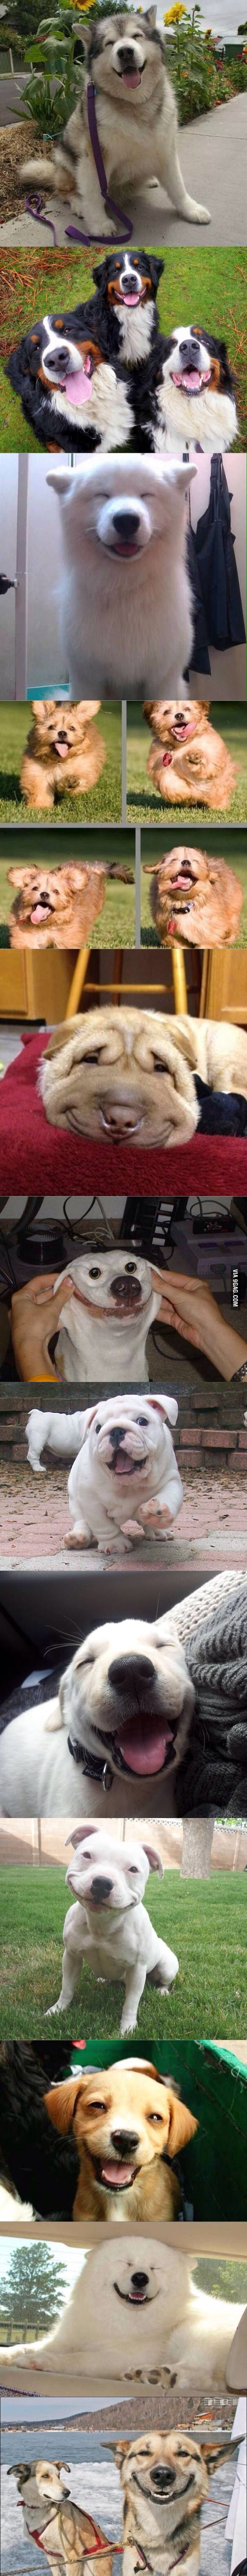 Smiling dogs